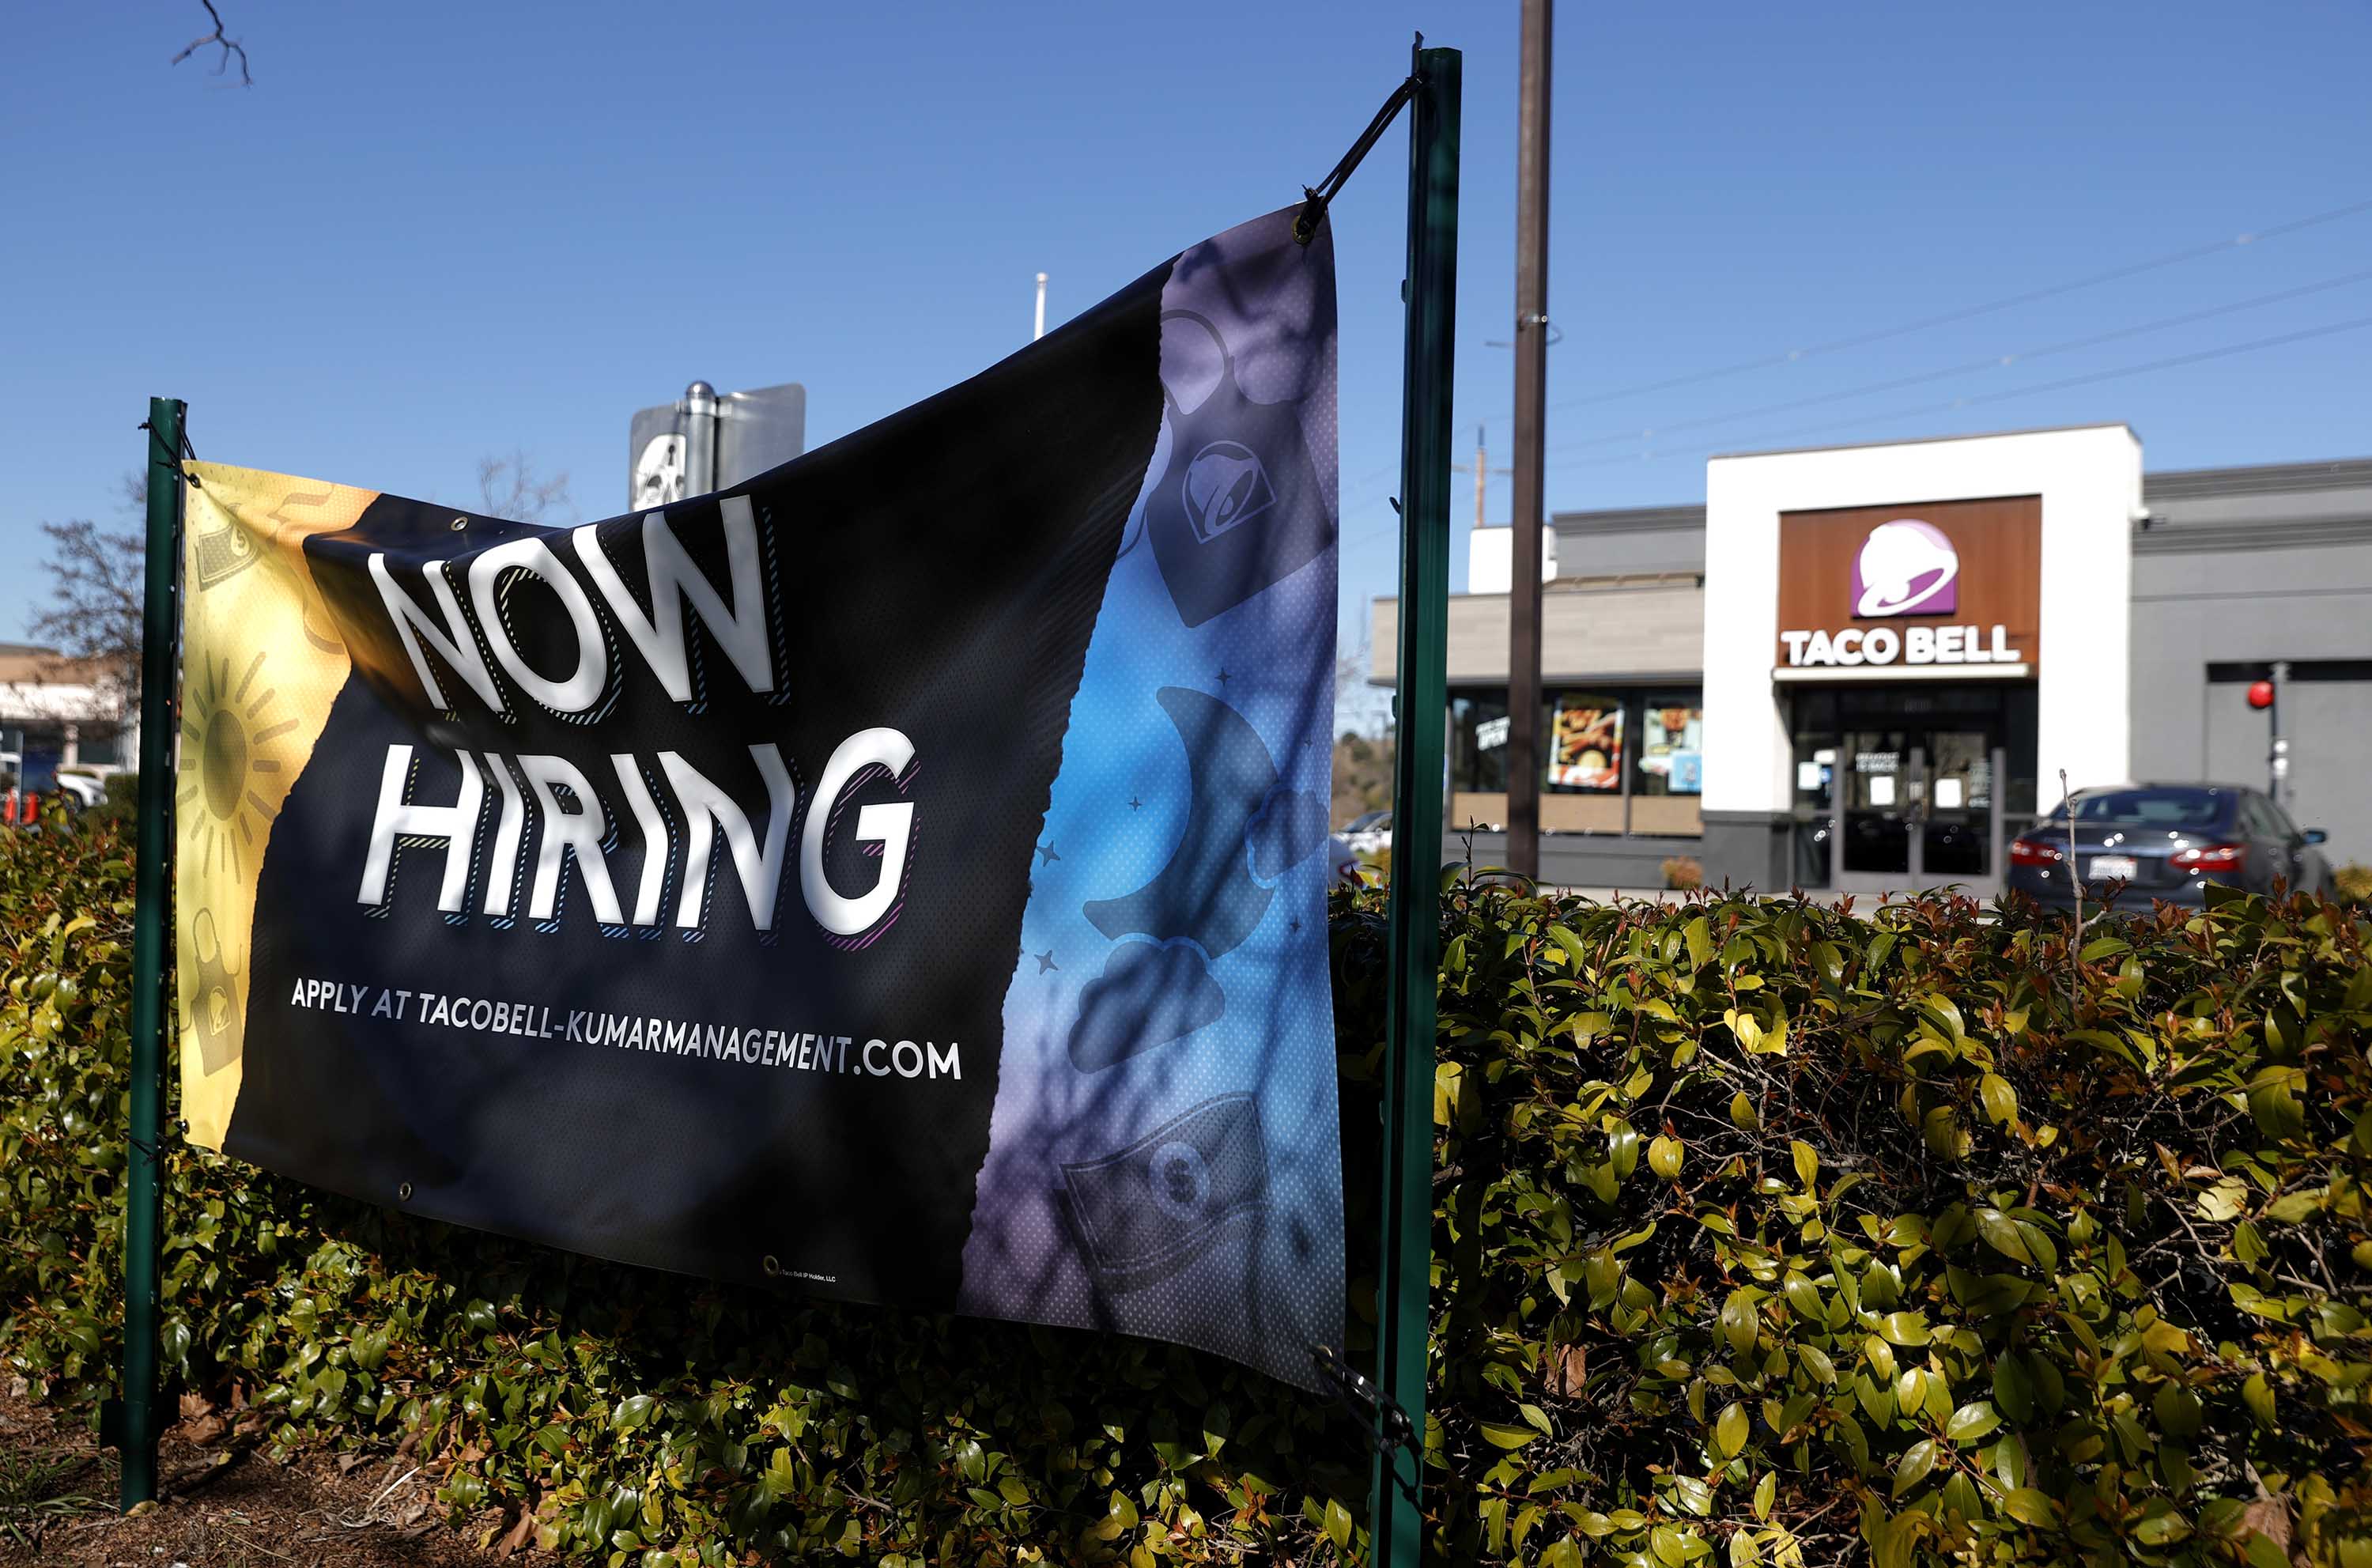 A 'now hiring' sign in posted in front of a Taco Bell restaurant on February 5, in Novato, California. 